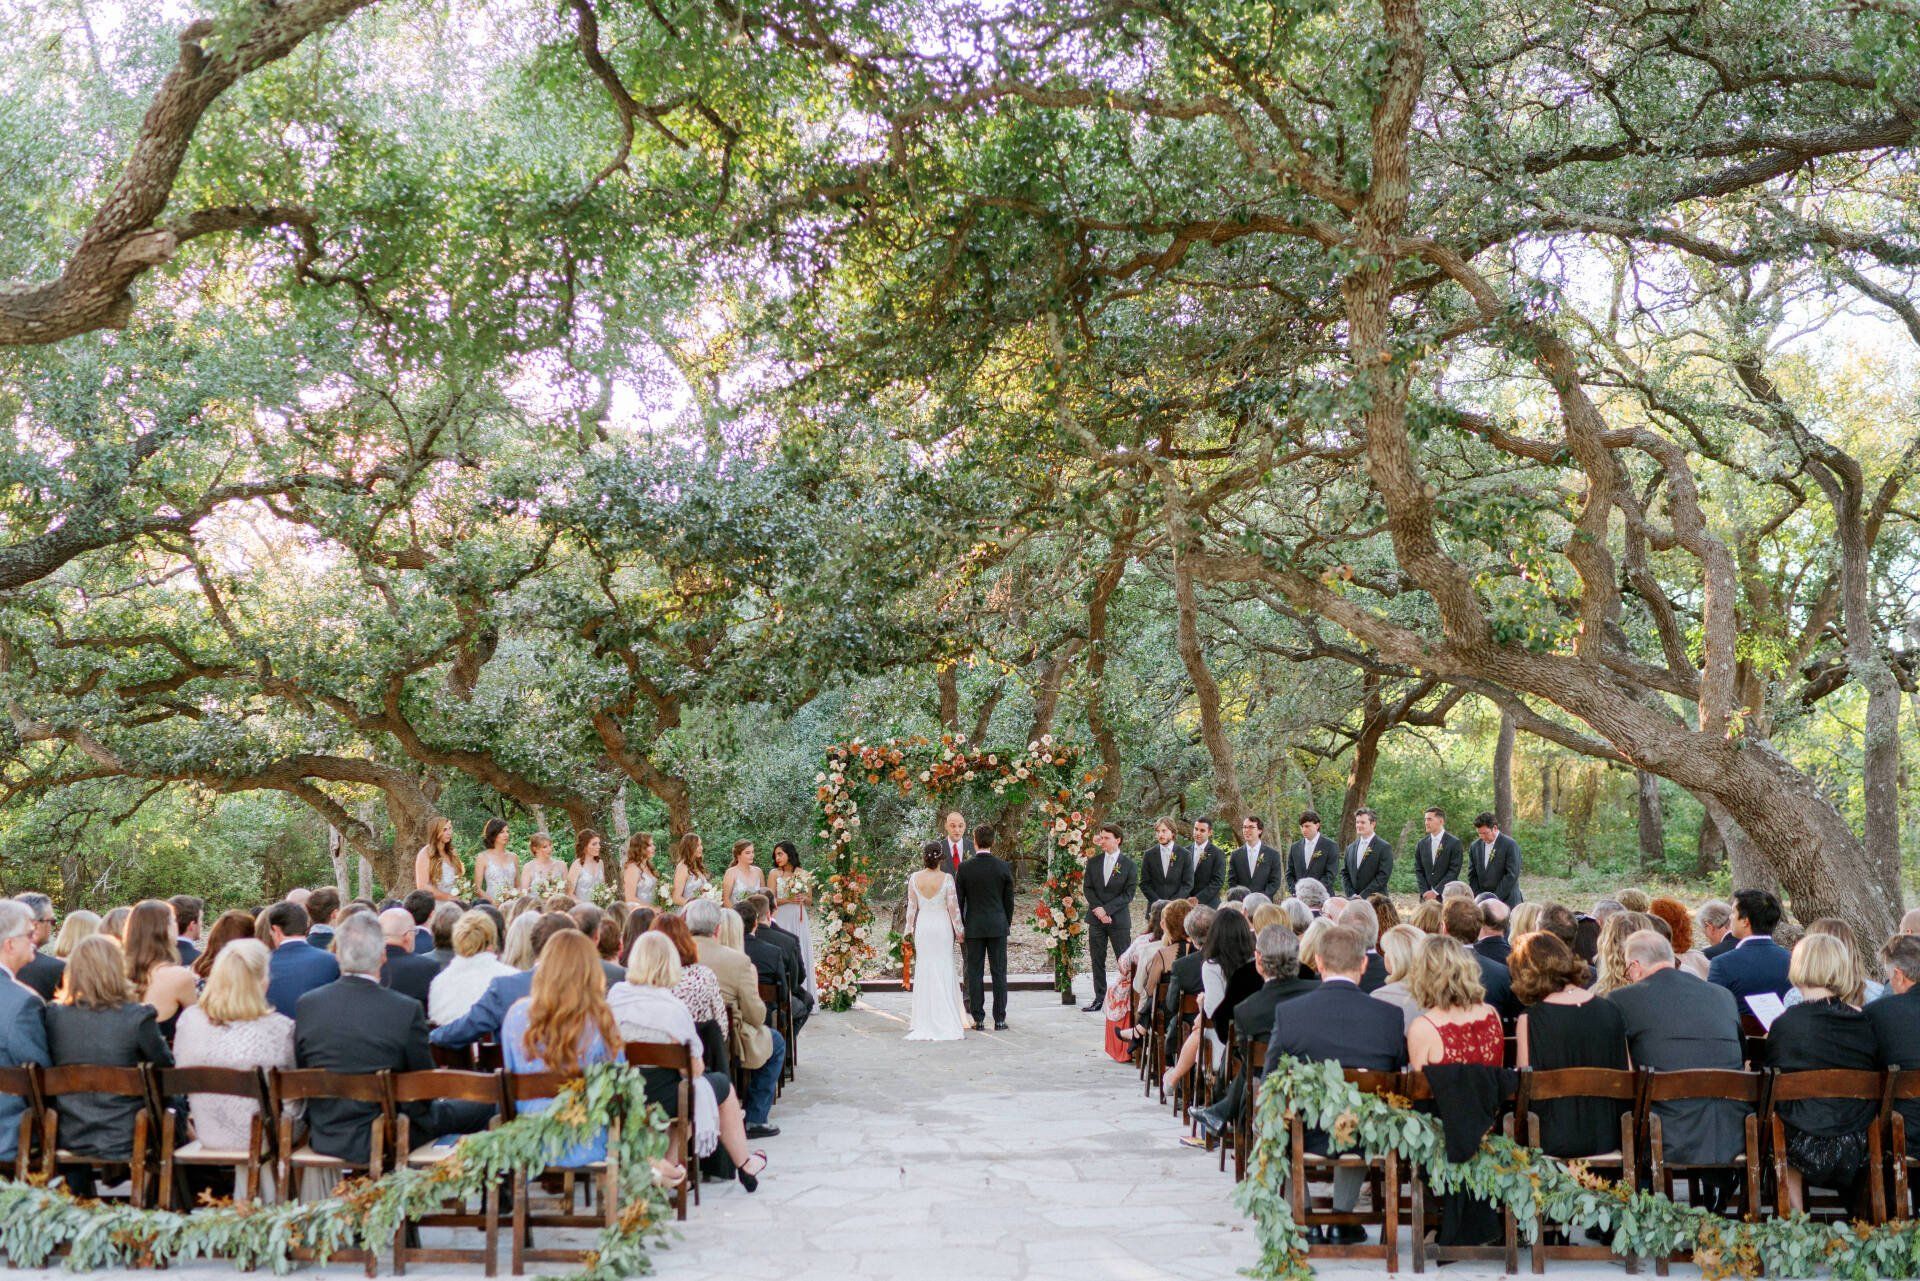 outdoor wedding ceremony in Texas Hill Country The Addison Grove Austin, Texas Wedding Venue in Hill Country Texas